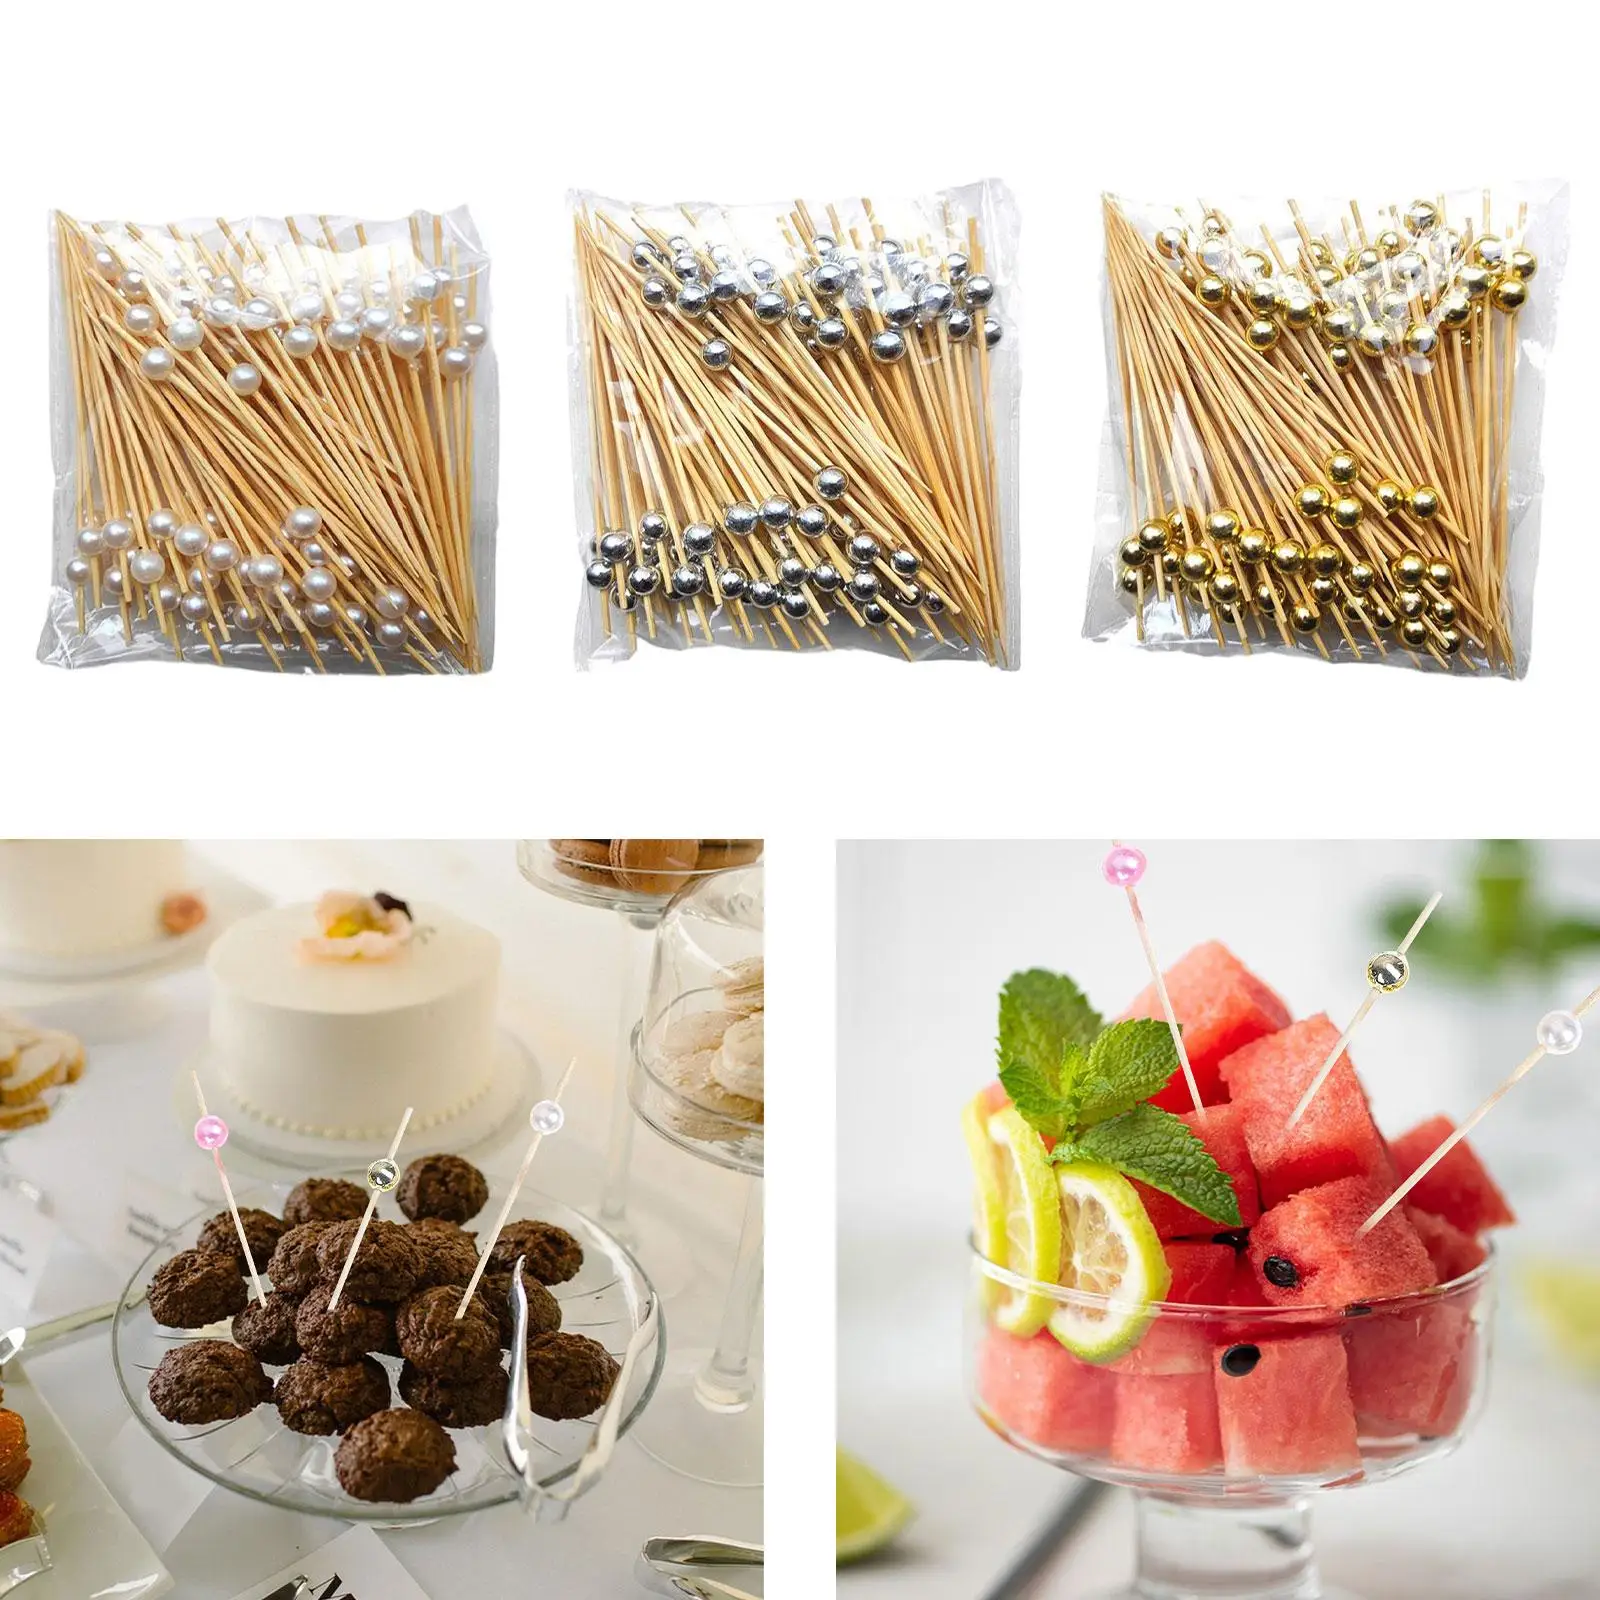 300Pcs Cocktail Sticks Disposable Food Fruit Forks Food Picks Bamboo Skewers for Appetizer Wedding Party Supplies Pastry Holiday